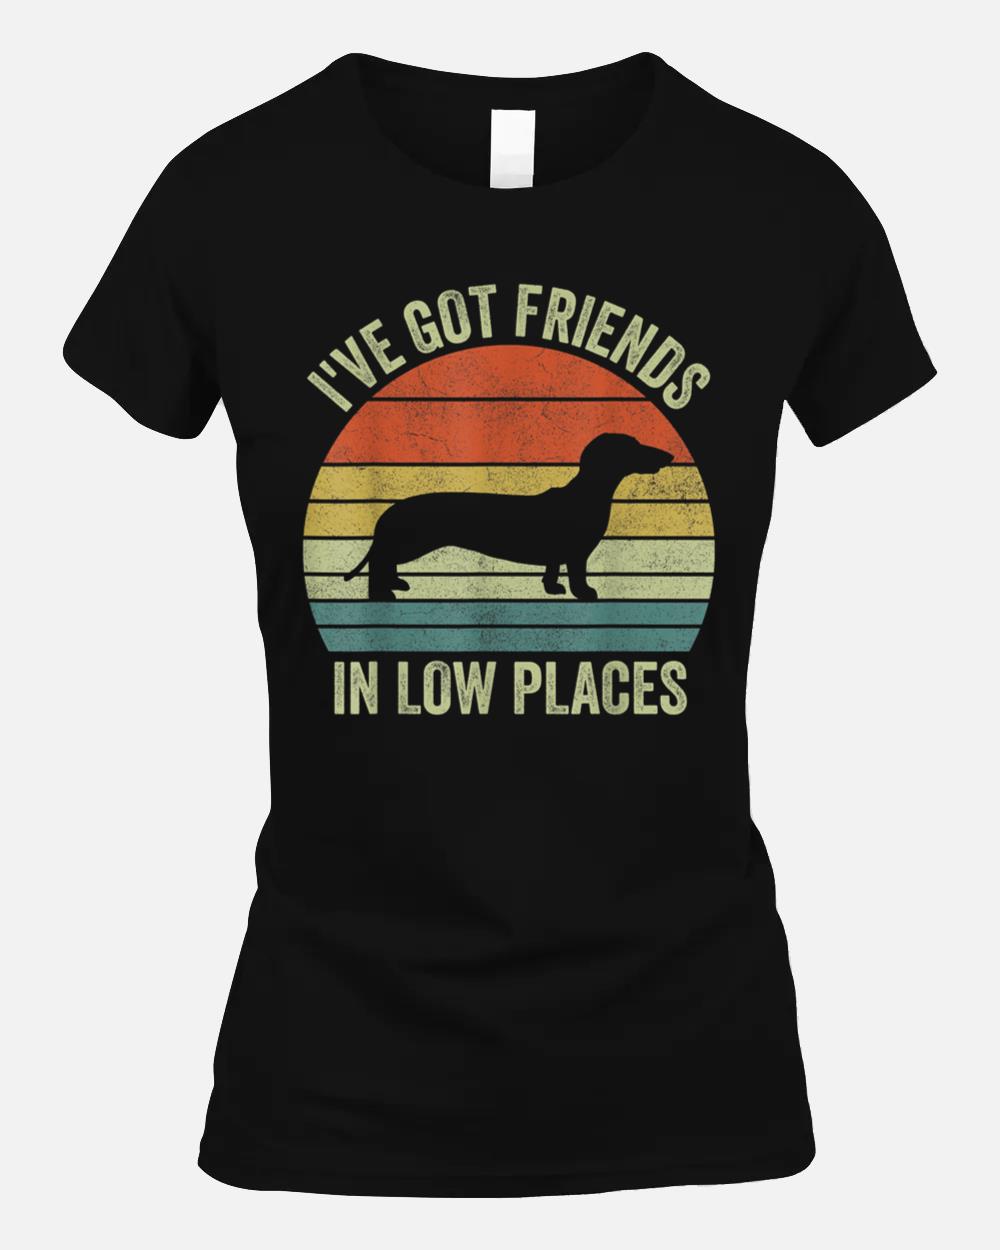 Ive Got Friends In Low Places s, Dachshund Lover Unisex T-Shirt